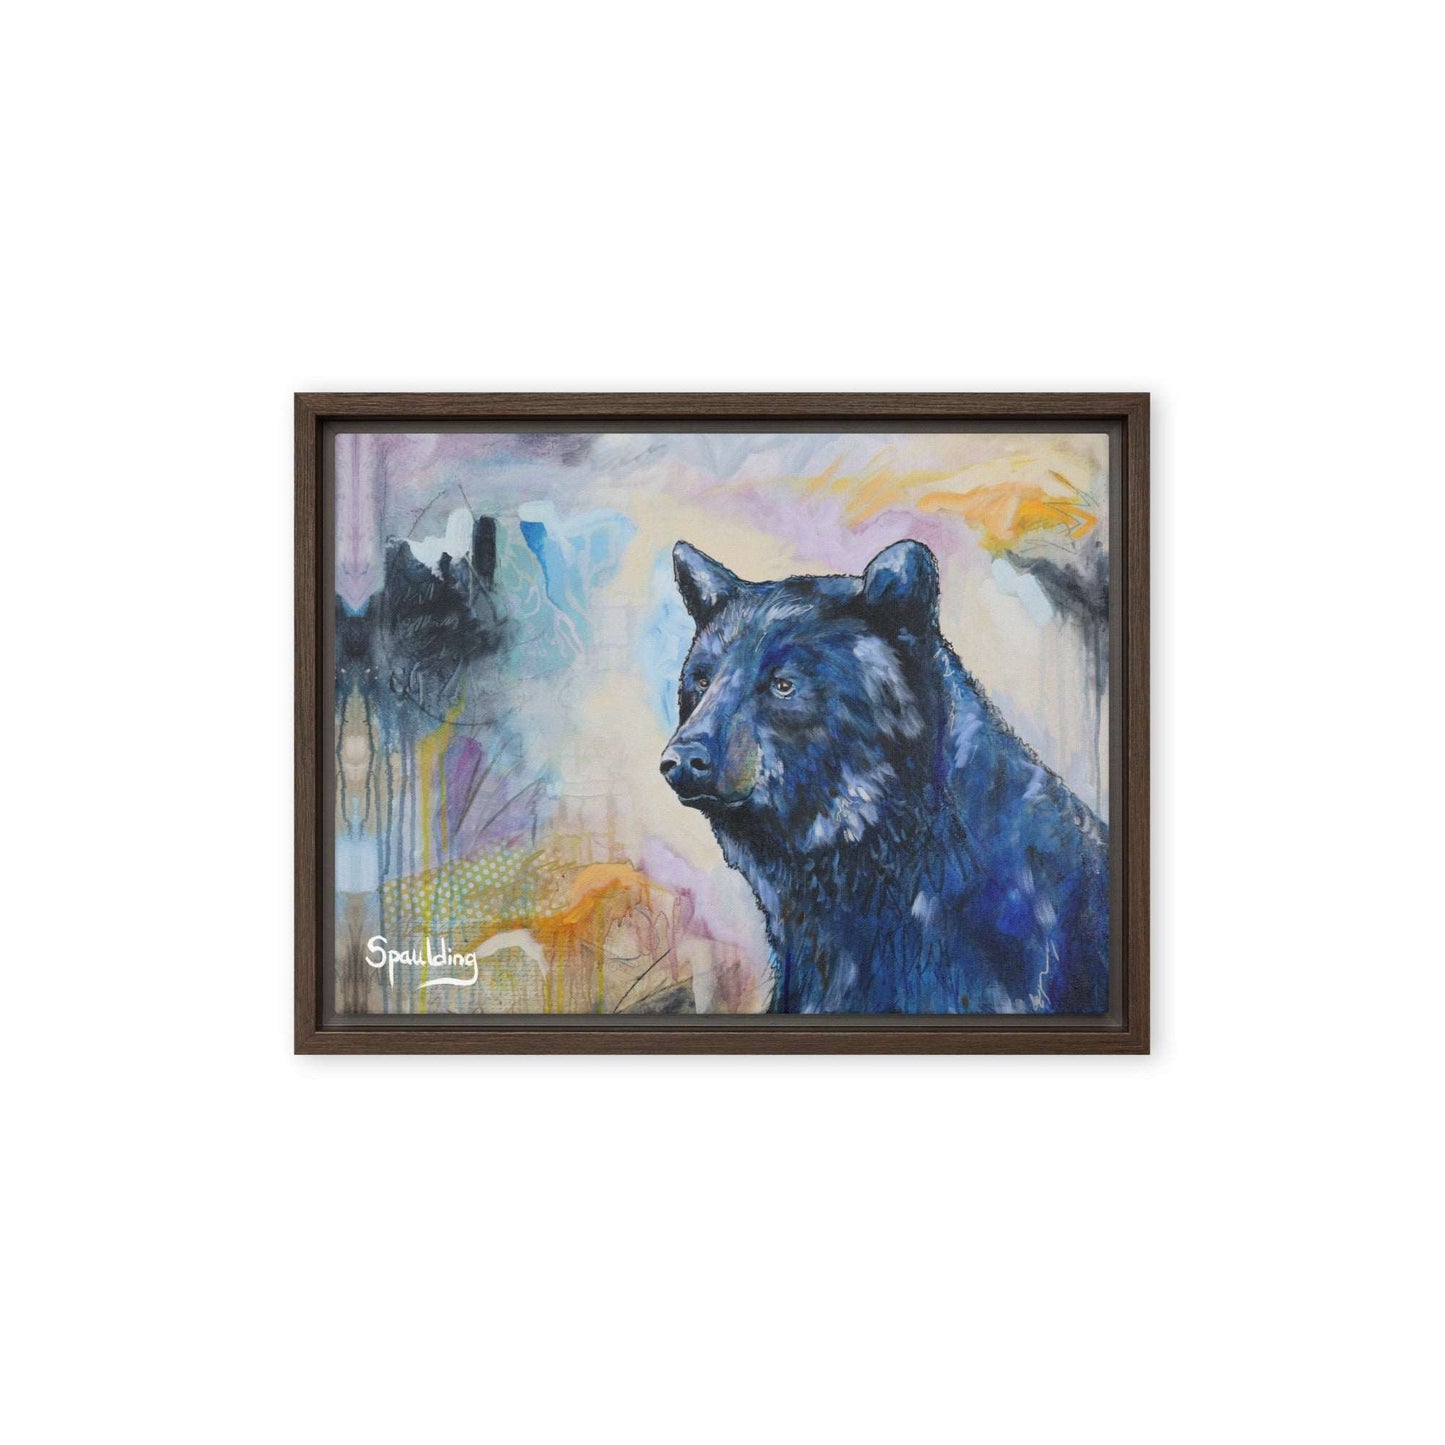 Framed Canvas print black bear in the corner looking out  color palette of blues, greys, oranges and black.